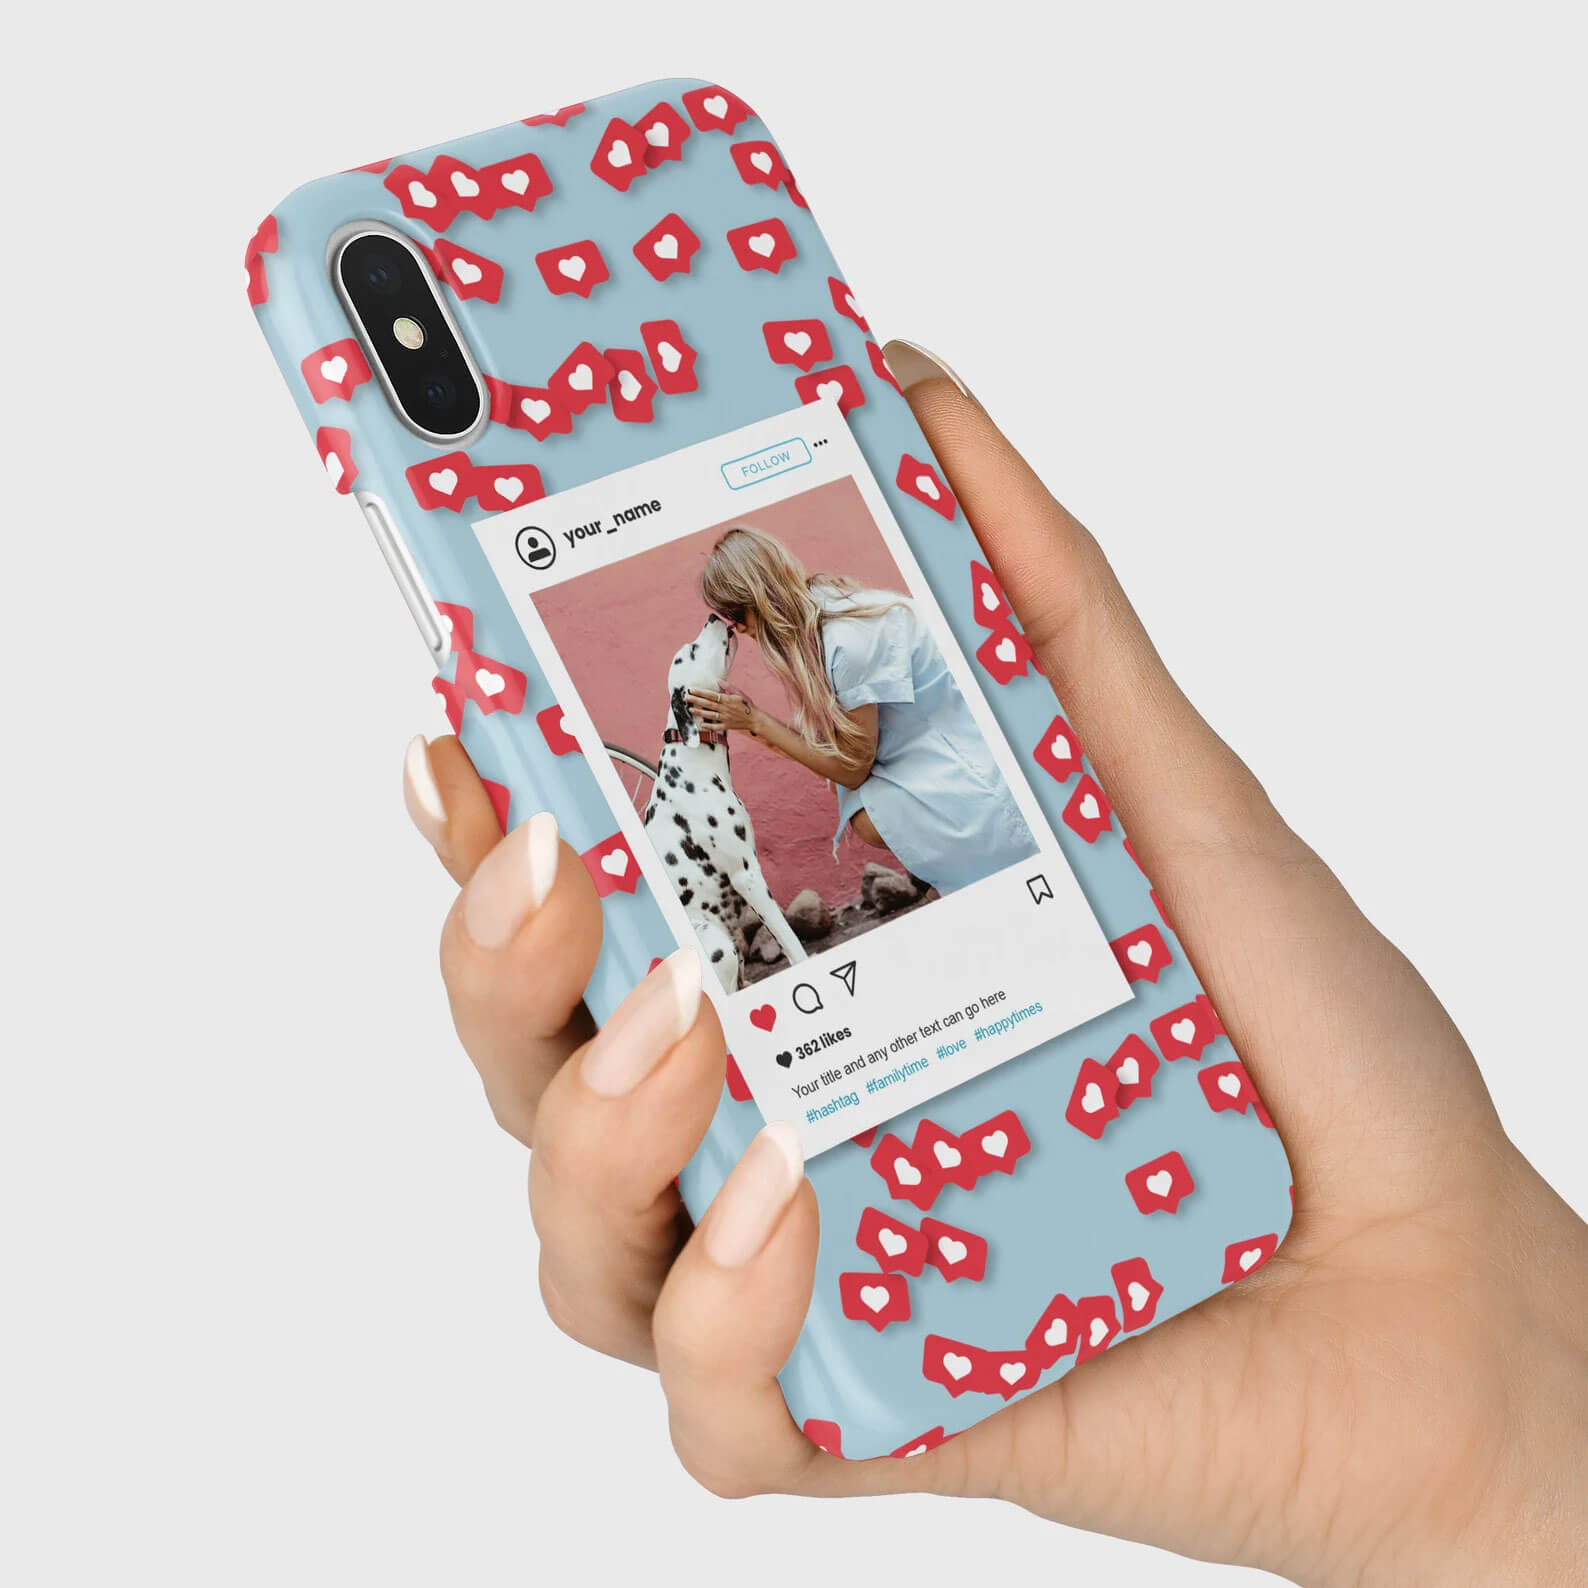 Wrappz phone case with an Instagram post feature on a ‘like’ emoji background.